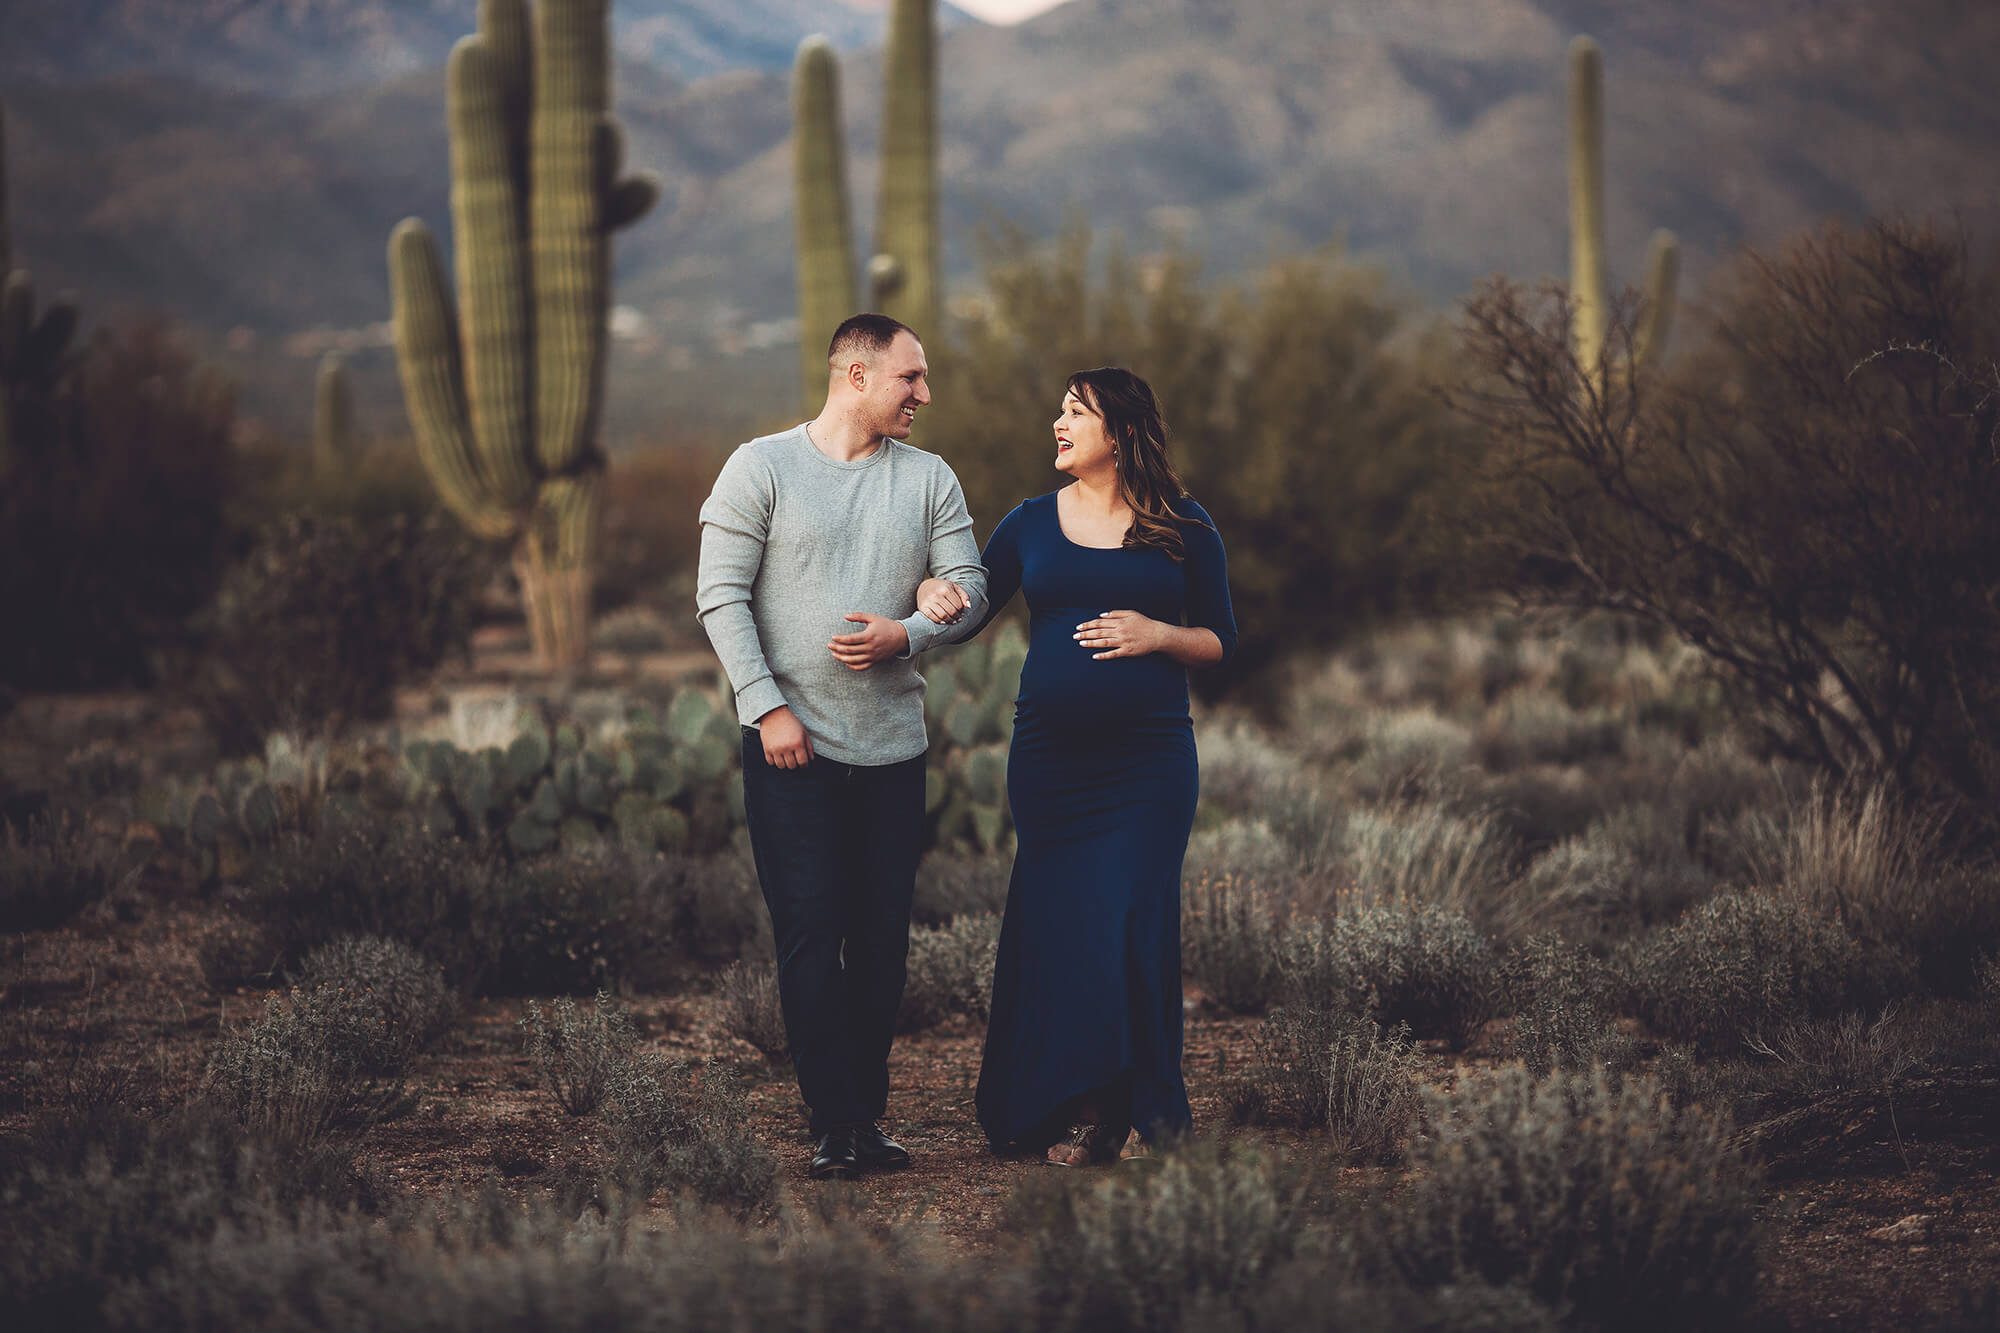 A little desert stroll for Alicia and her husband.